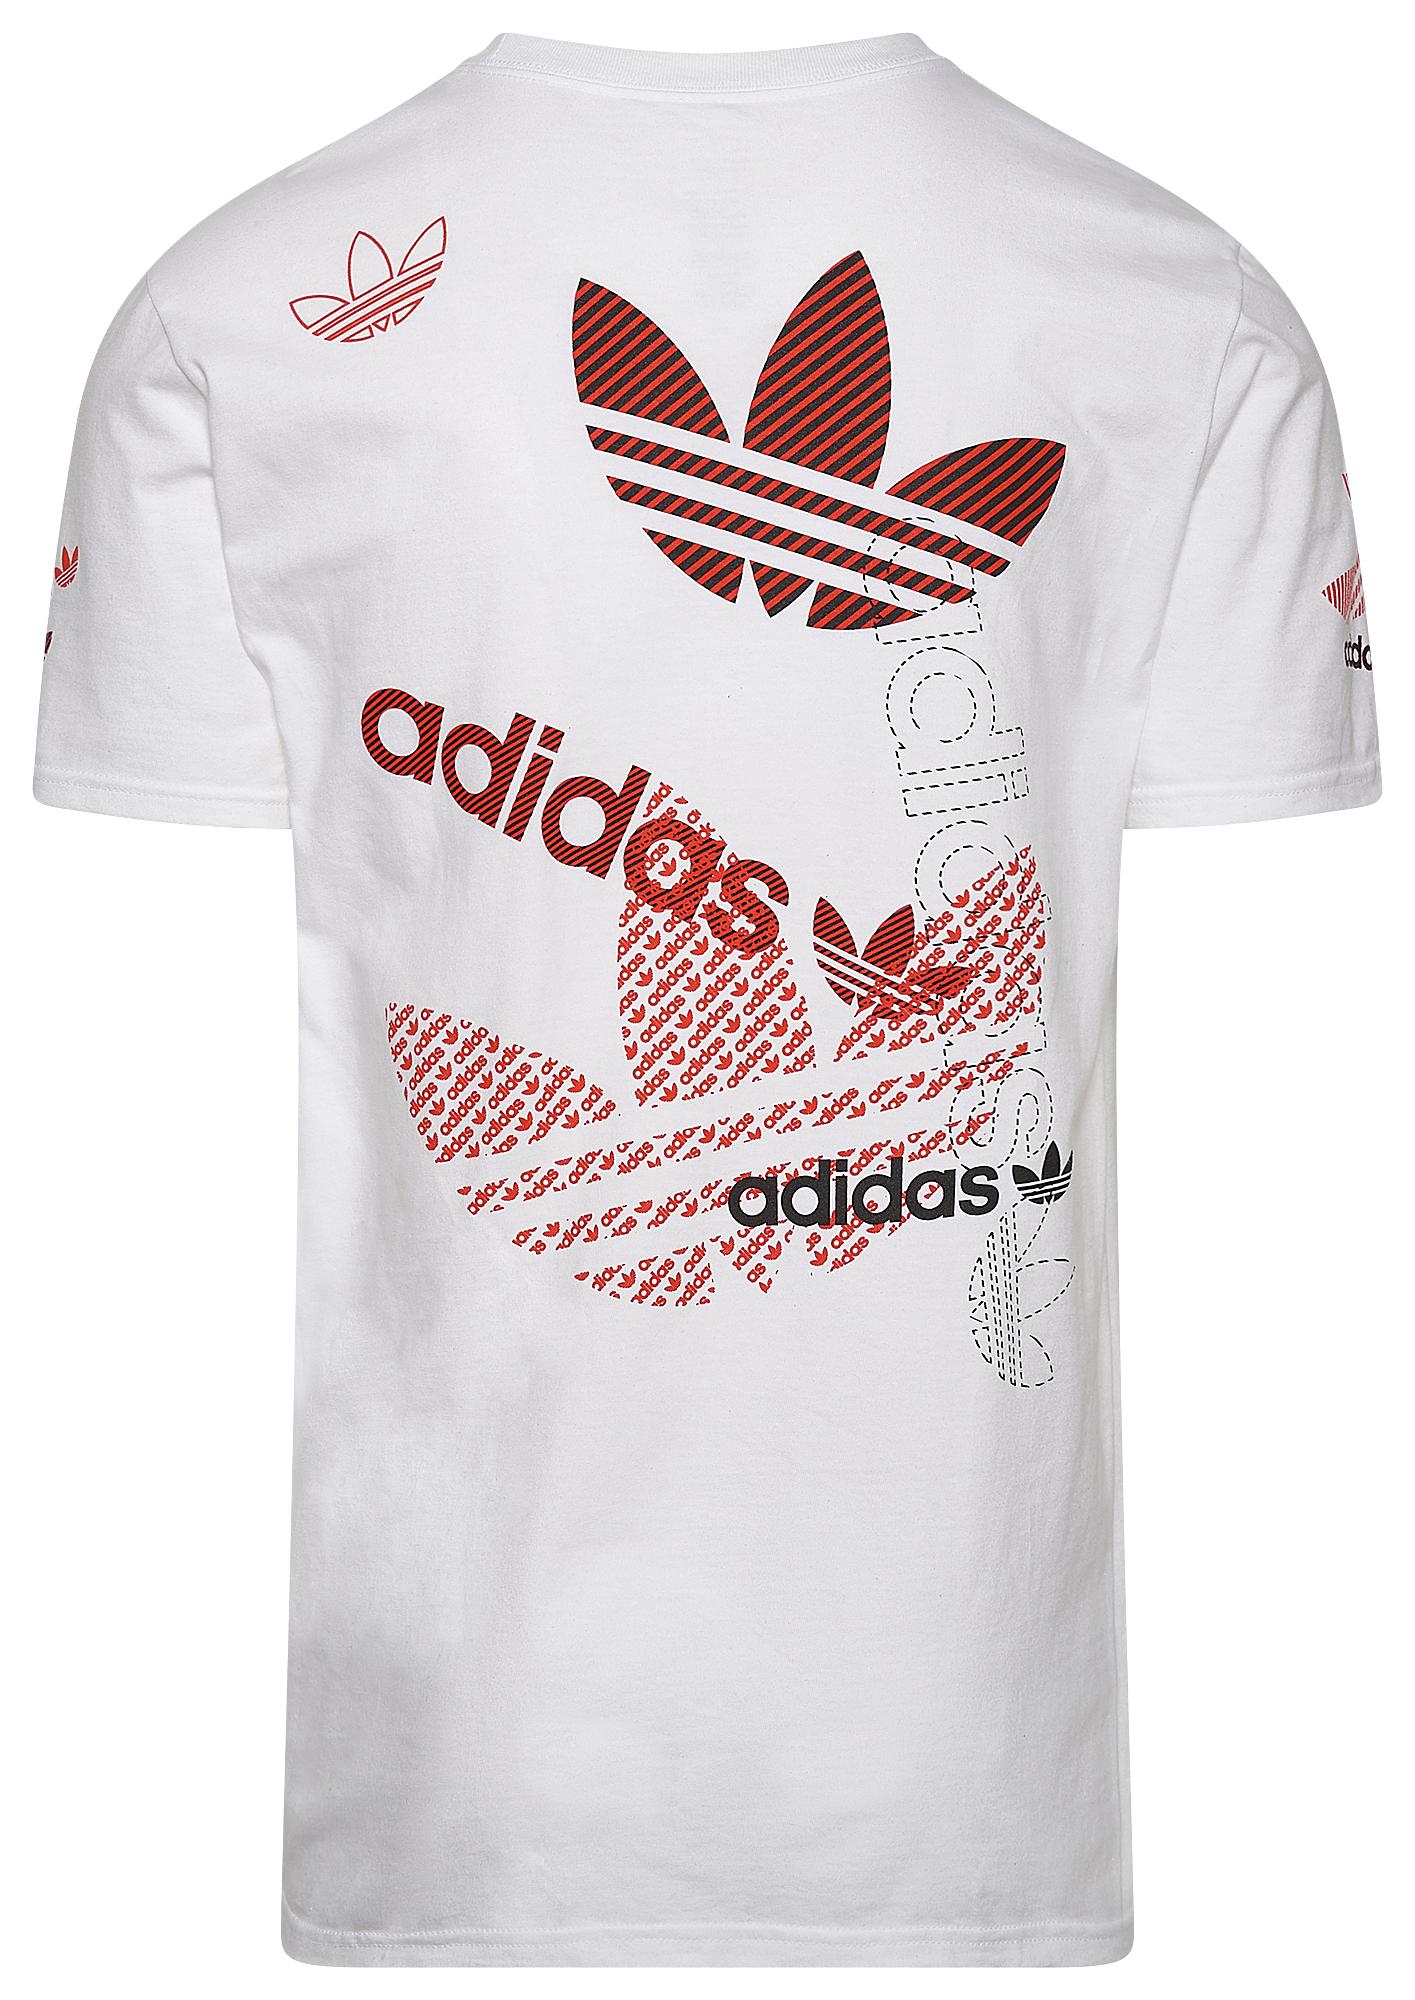 adidas white t shirt with red logo